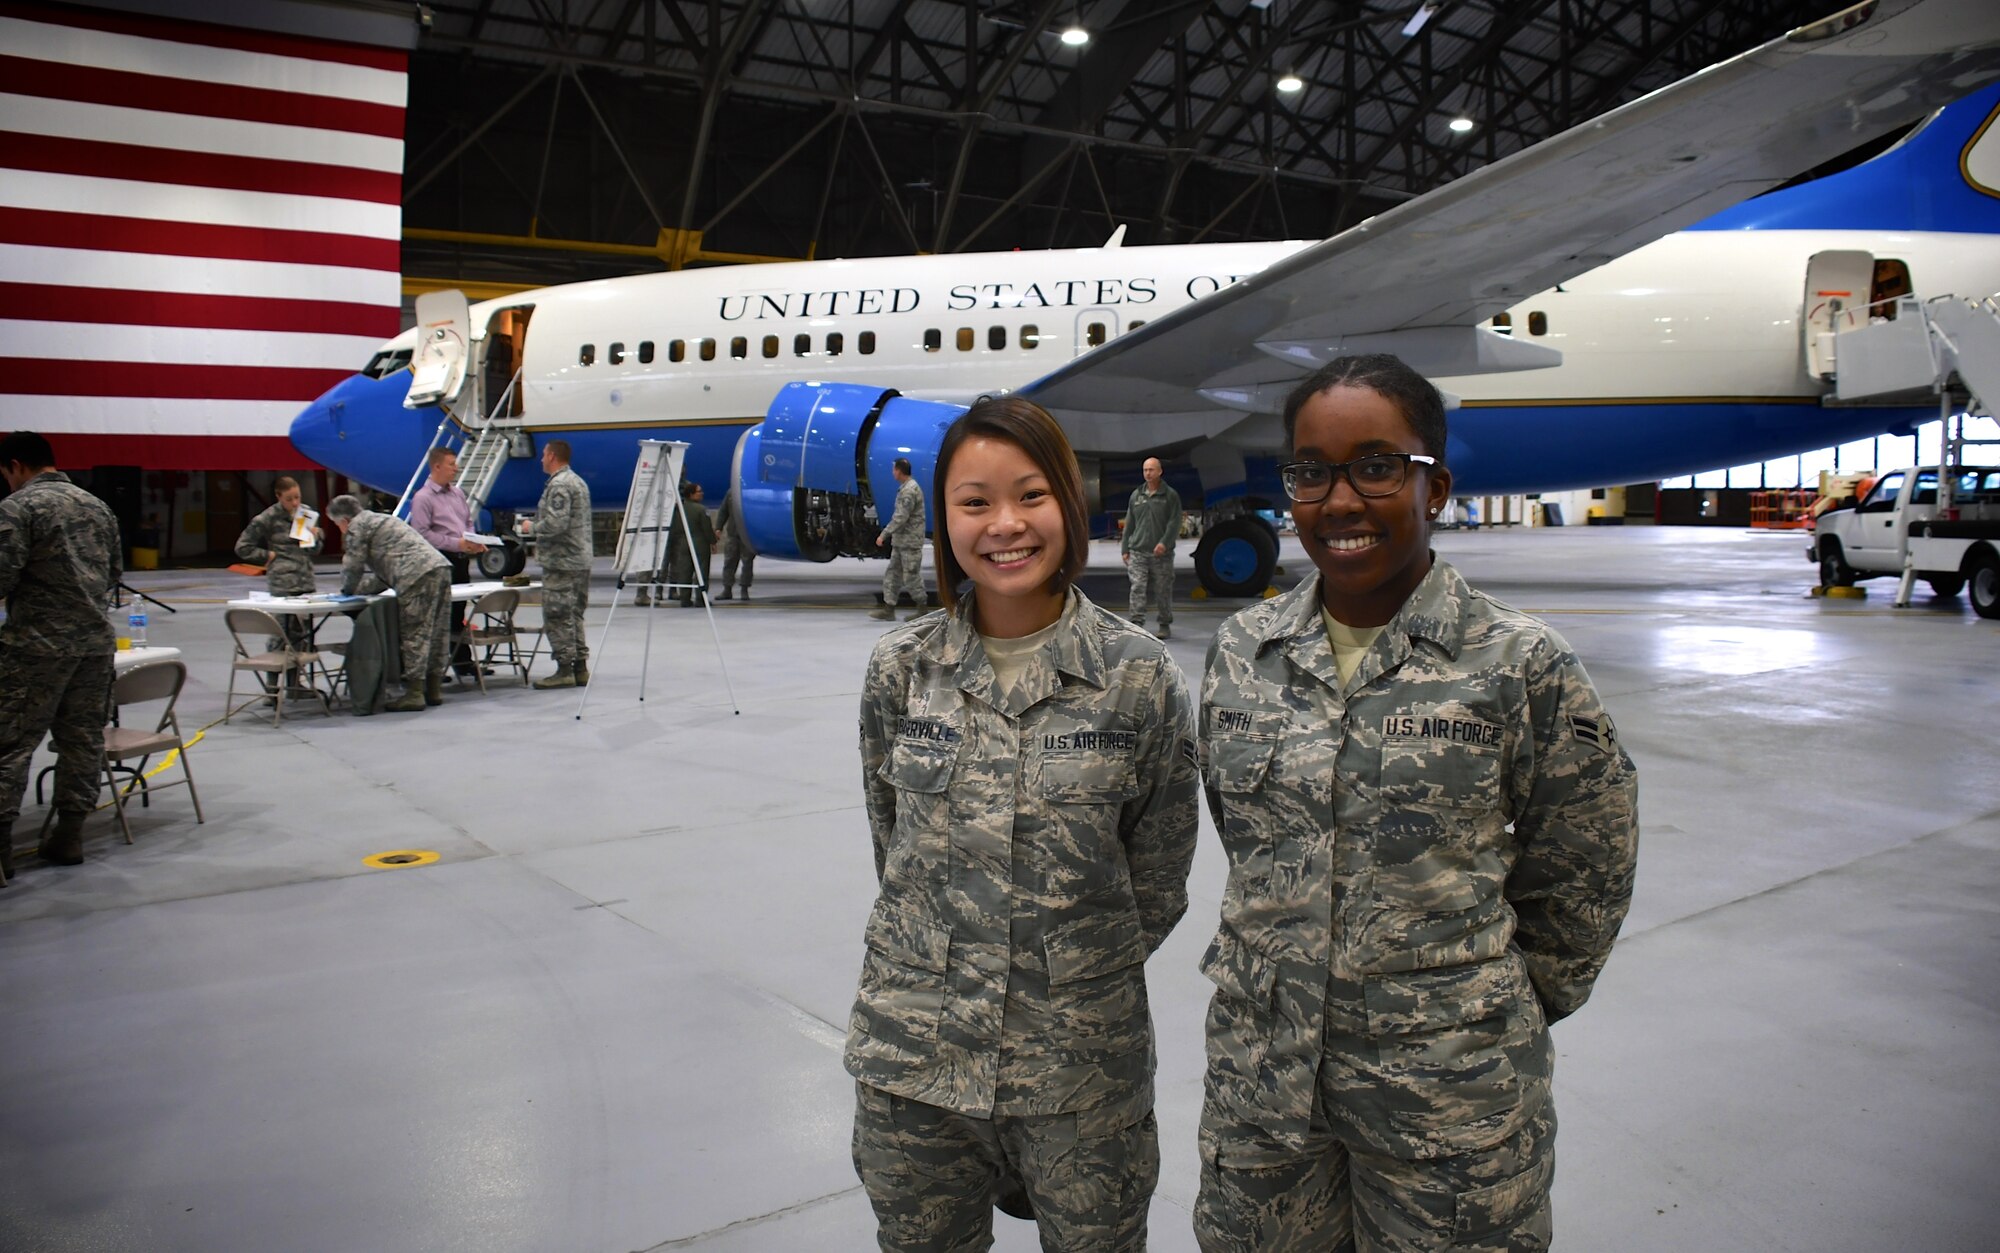 The 932nd Airlift Wing educated Airmen about various careers available within the Illinois unit, and cultures in the background of various members, as they honored their contributions during a Career and Diversity Day.  Here, Airman 1st Class Kathryn Baskerville and Airman 1st Class Kaida Smith, both from 932nd Force Support Squadron, pause in front of the 932nd AW's C-40 plane.  Booths from various career fields showed off job openings and training needed to accomplish those missions like security forces and aircraft operations.  A process booth took suggestions from members on how to improve the unit as well.  The event honored cultural diversity, and exposed 932nd AW Airmen to the qualities that make various cultures unique; it took place November 4, 2018, at Scott Air Force Base, Illinois.  (U.S. Air Force photo by Lt. Col. Stan Paregien)